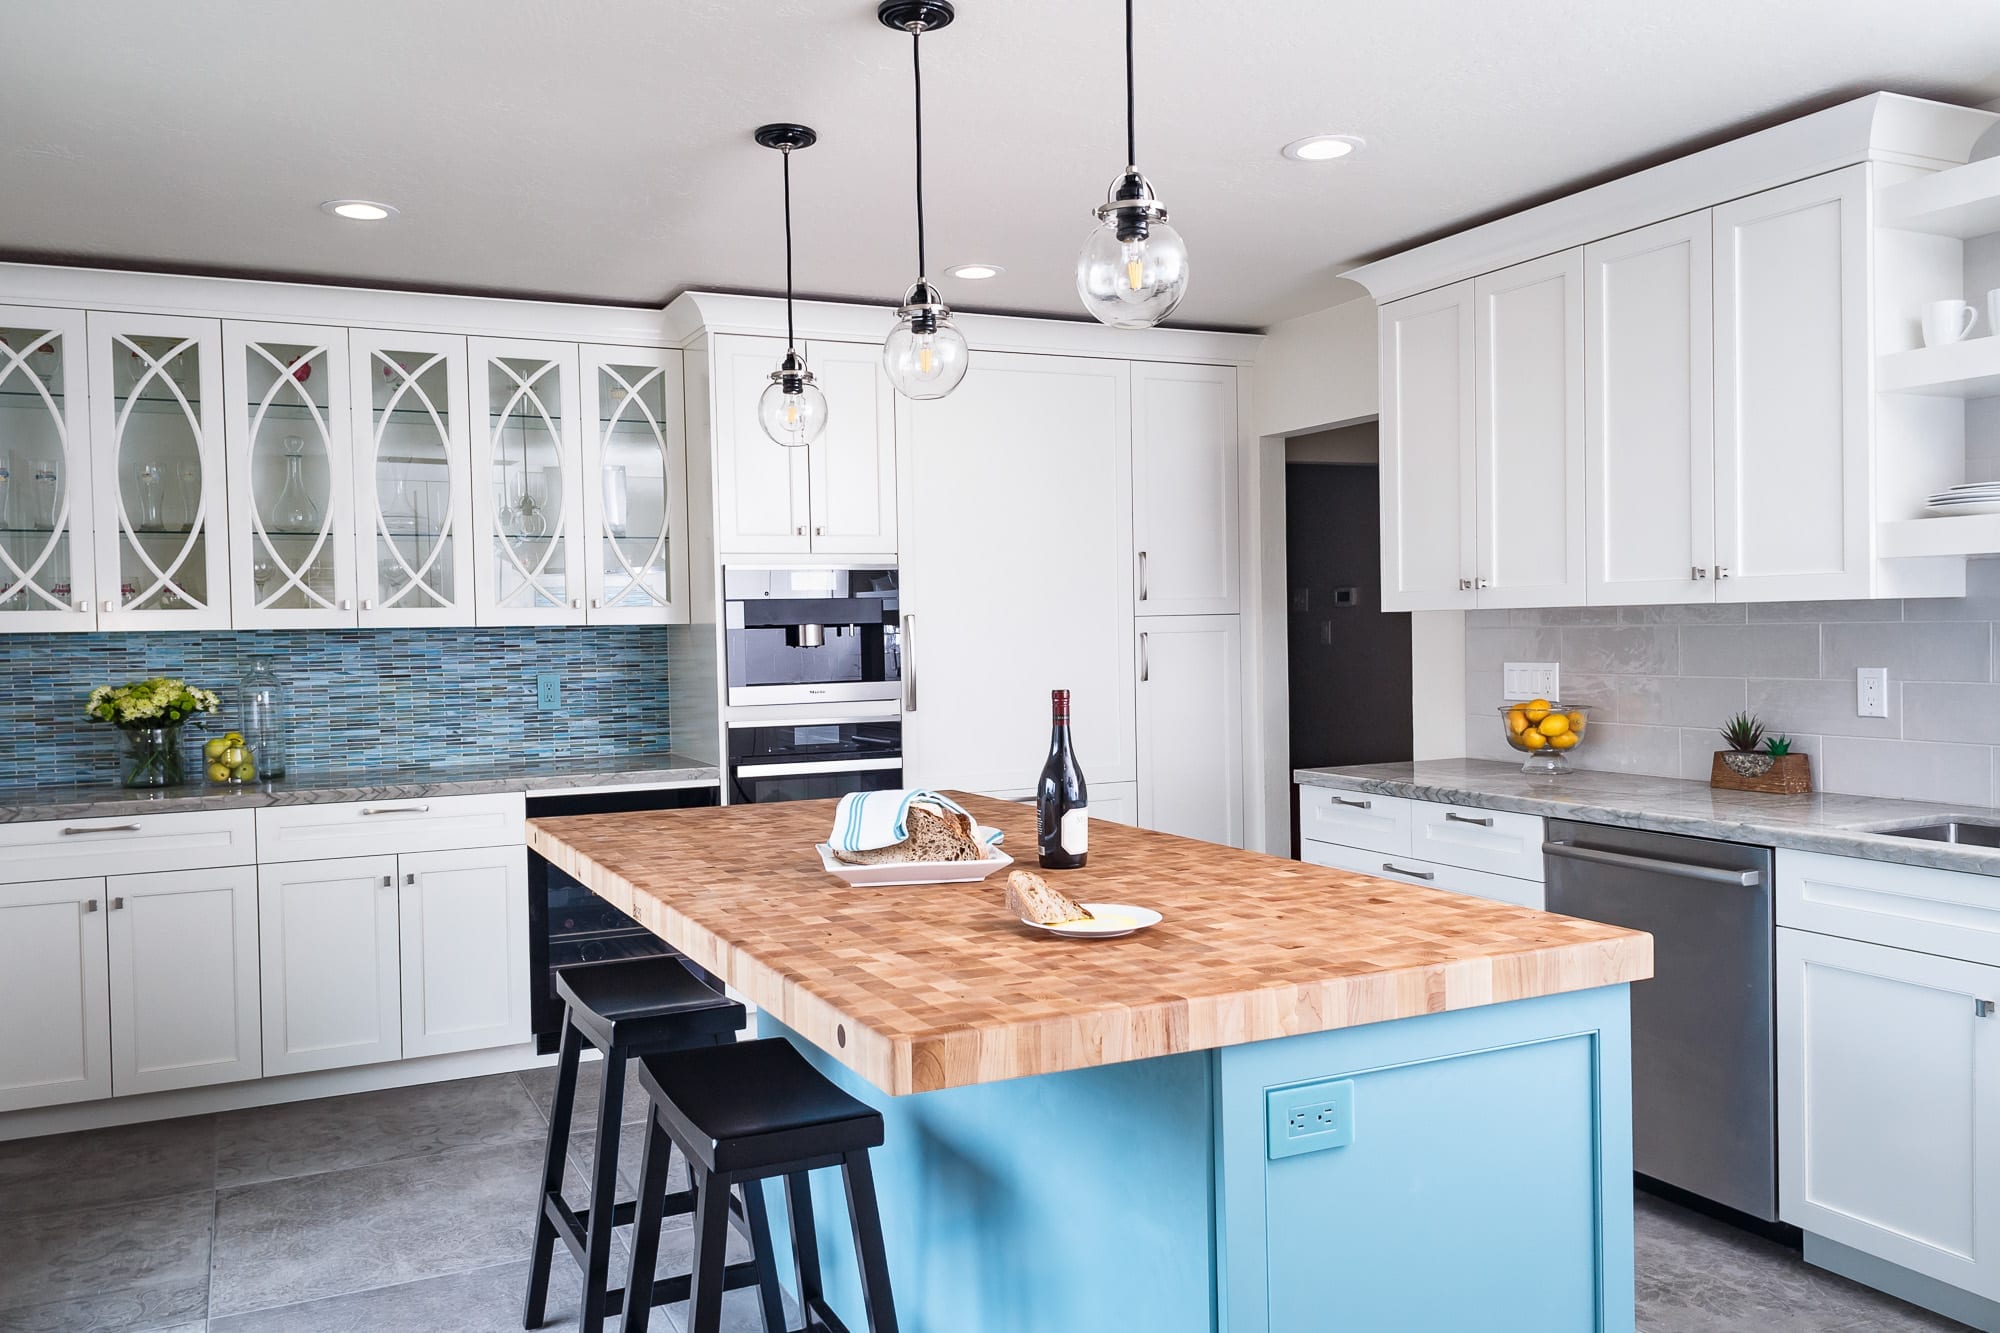 Butcher block and blue island with white cabinets kitchen design